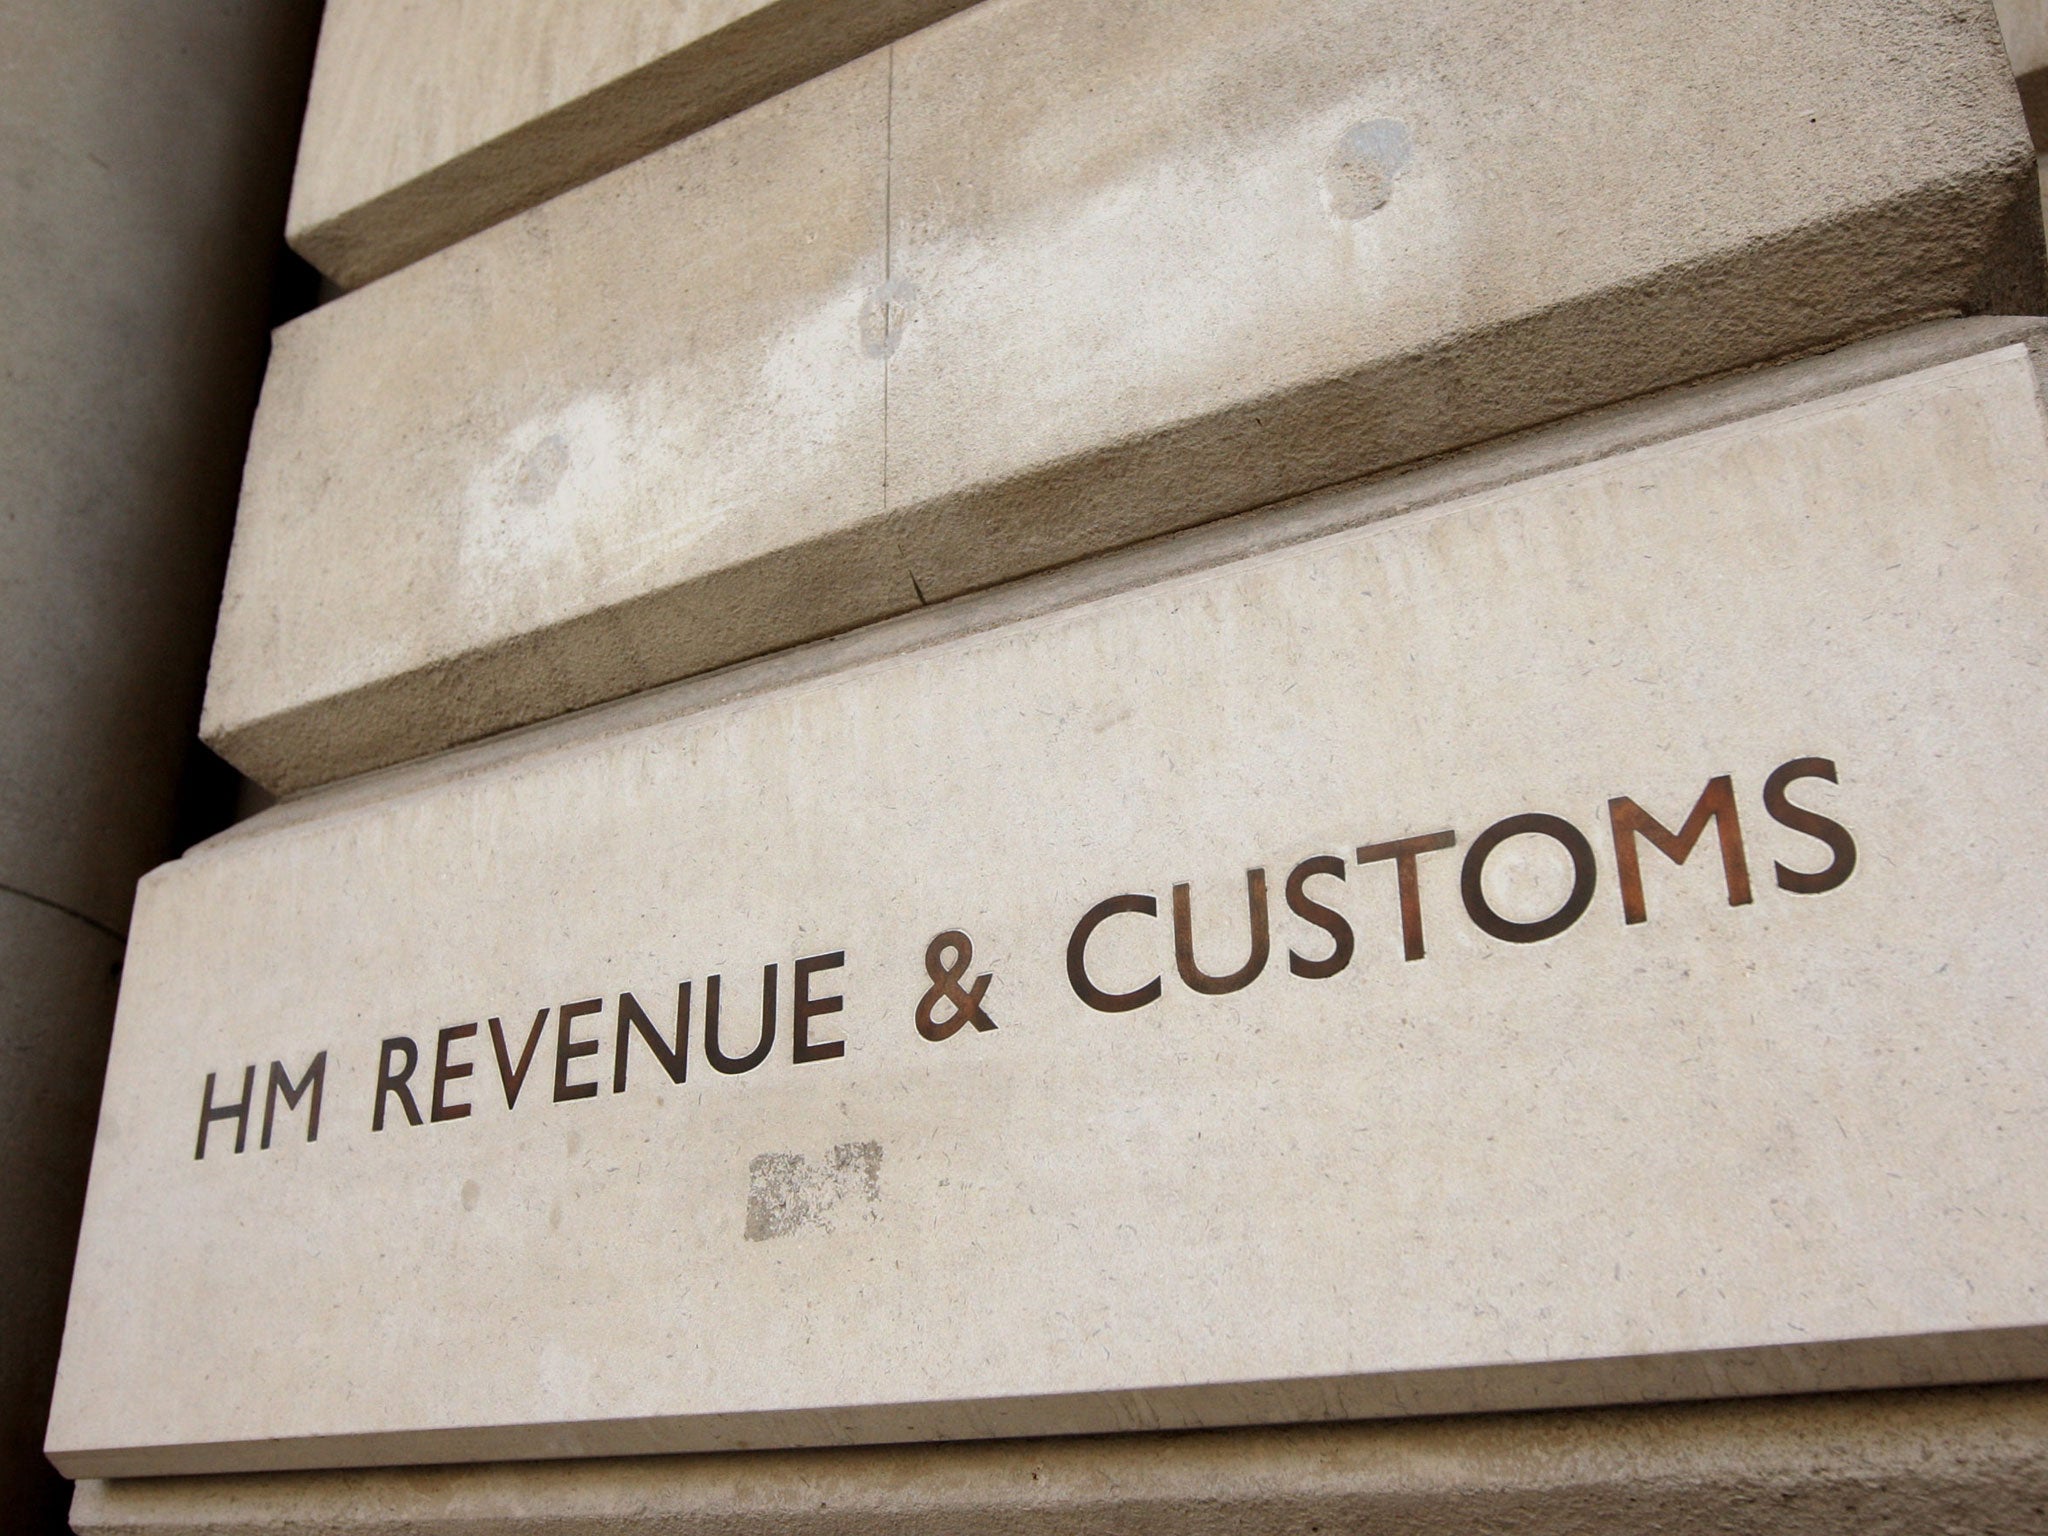 Property searches by HM Revenue & Customs rose by nearly a fifth in 2014 as the Government raised the pressure to combat tax evasion